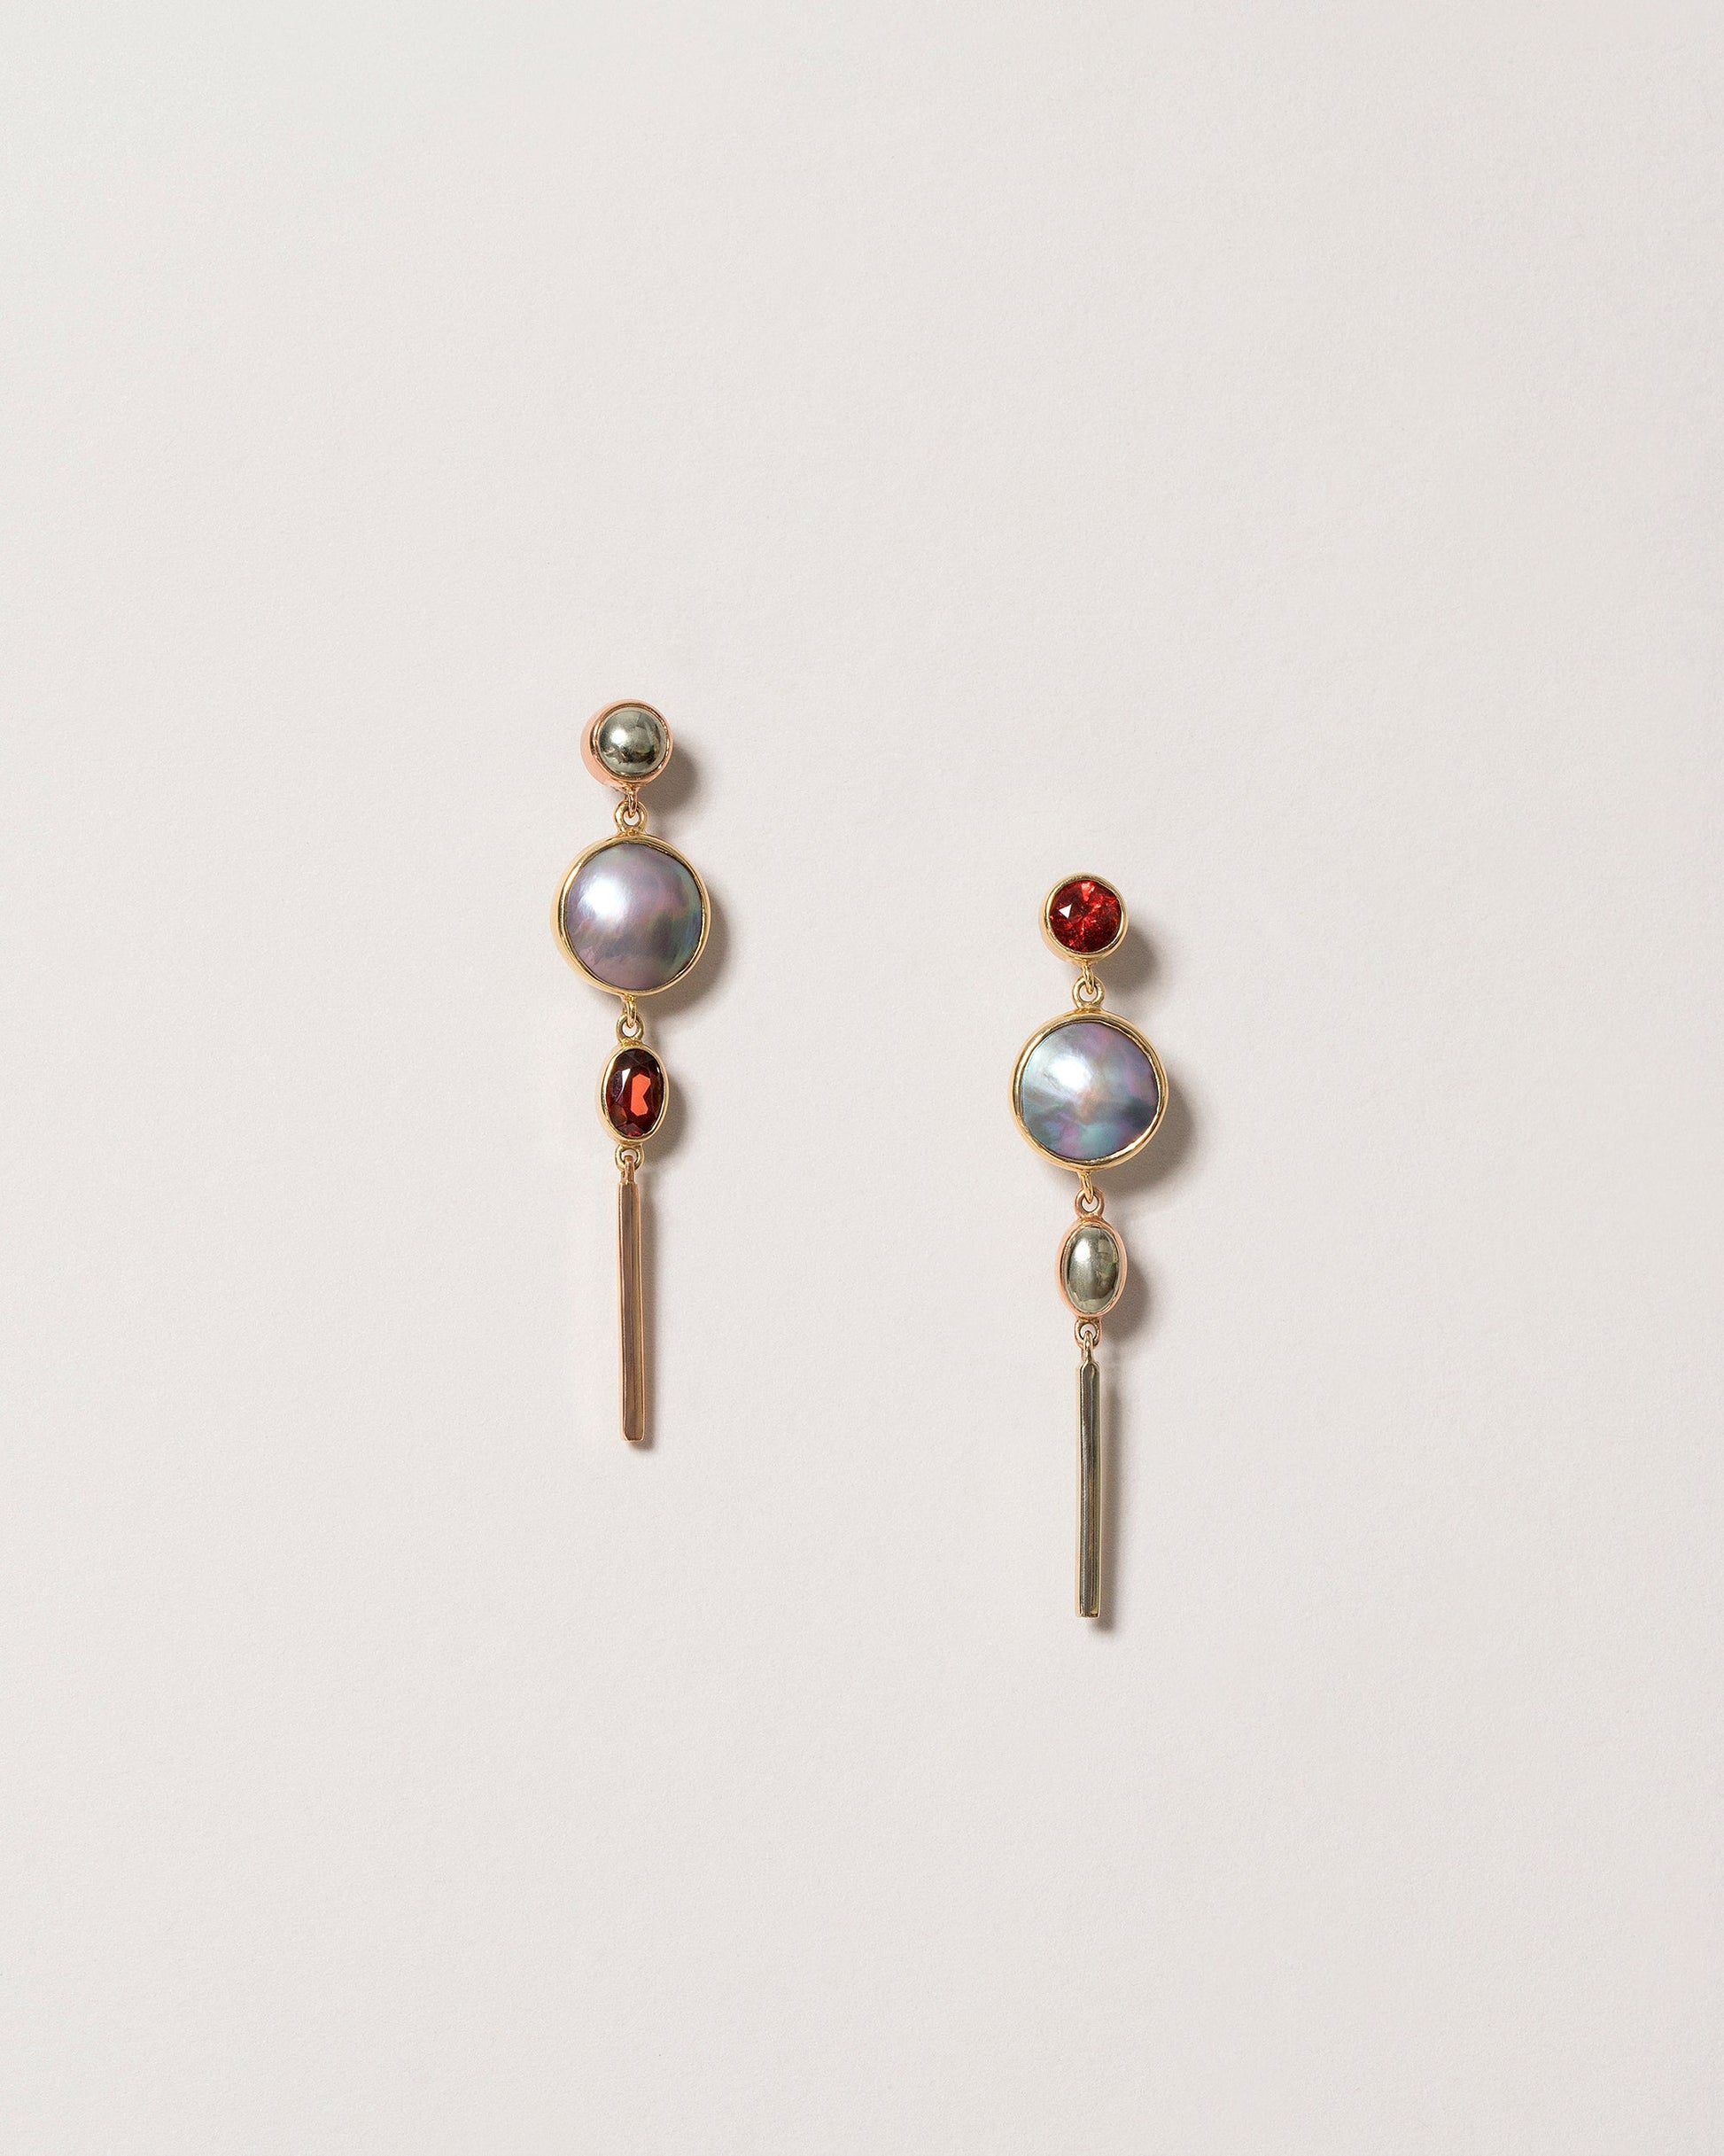  Act 2. Earrings 3 on light color background.